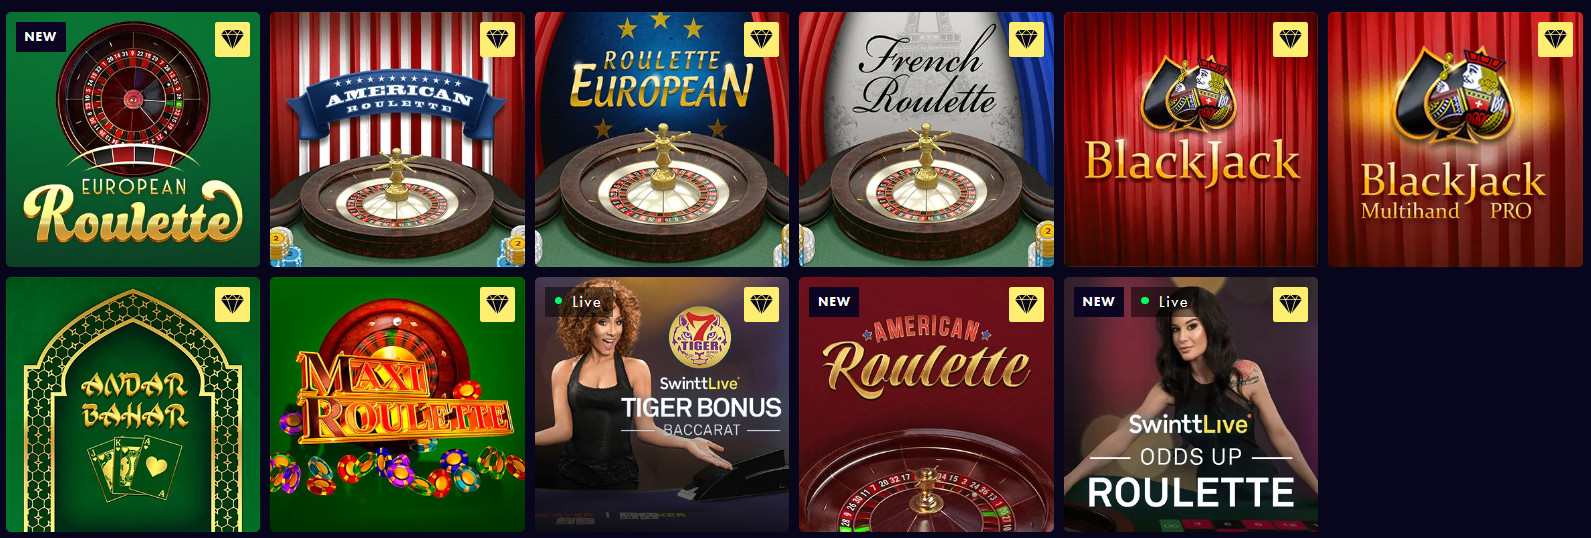 Table Games Section at Millionaria Casino